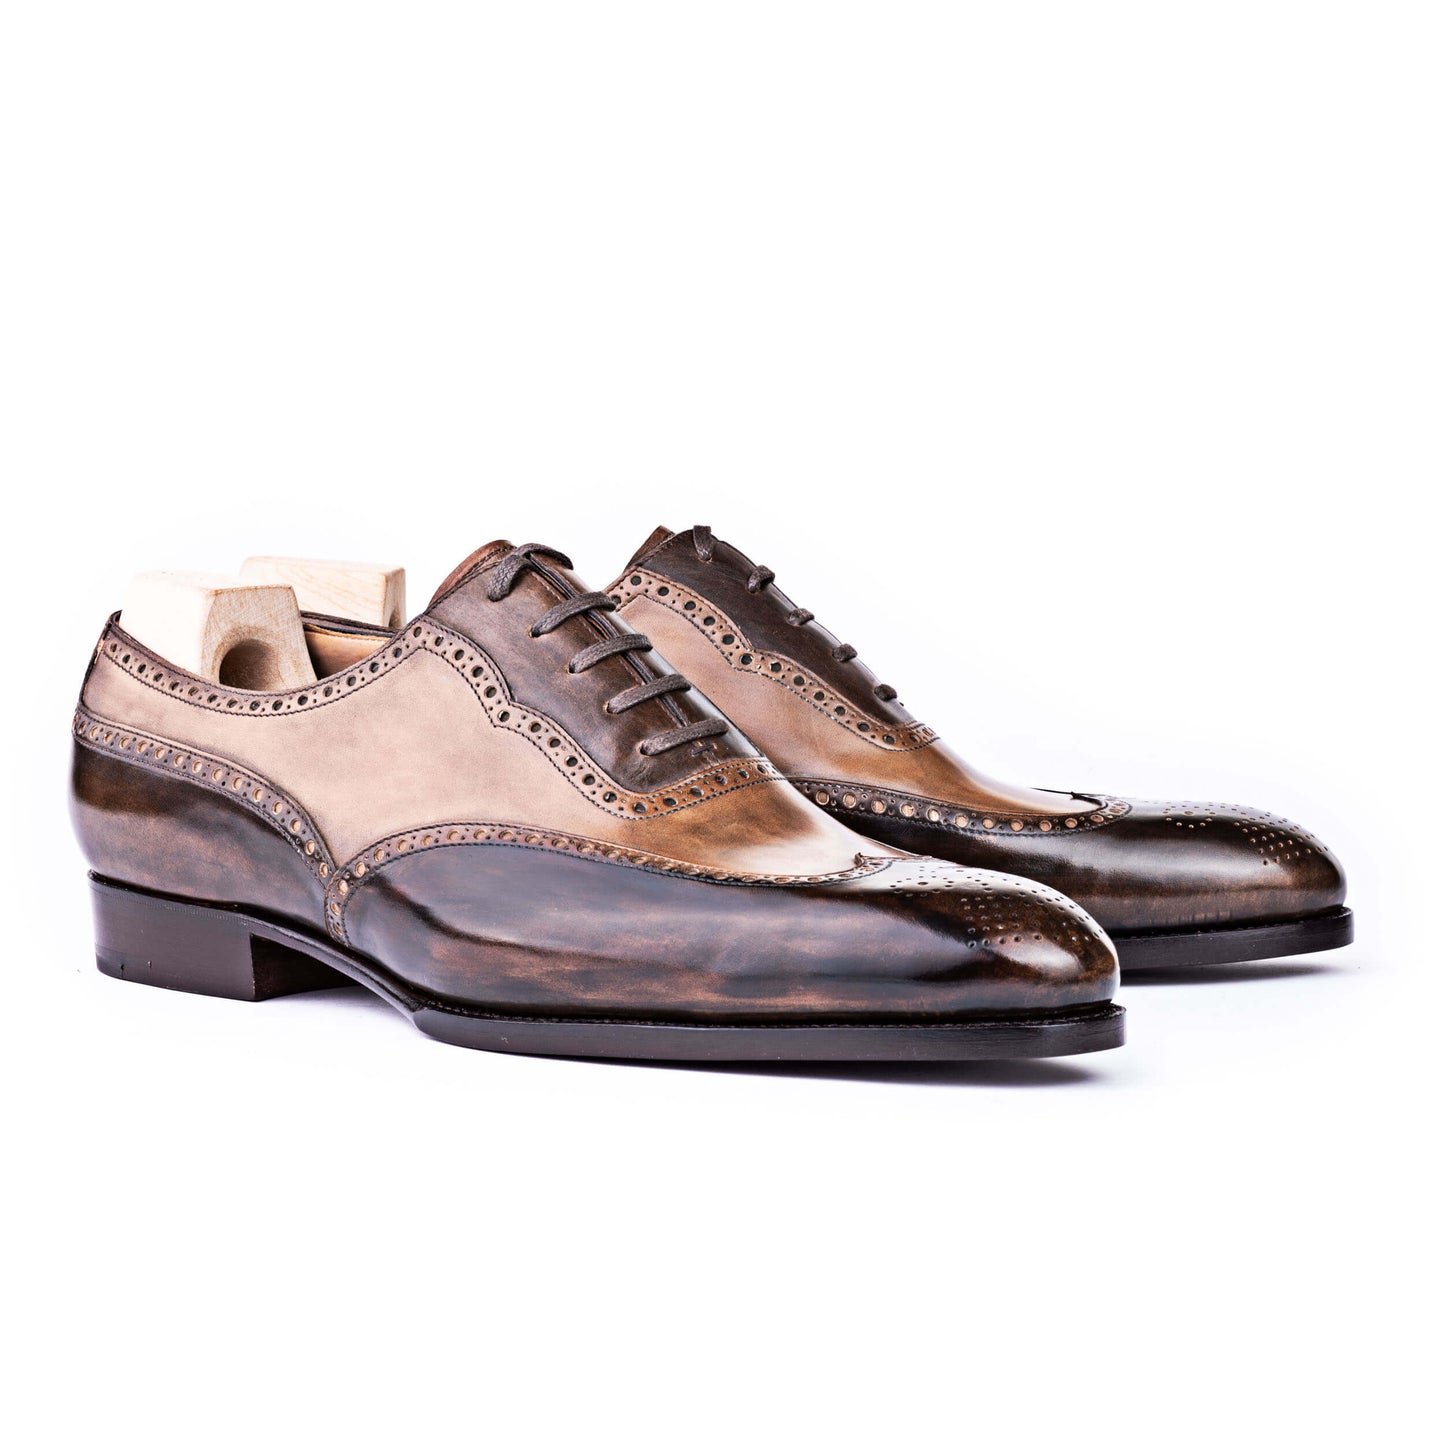 Long wing full brogue Oxford - Biccolore, Spectator!